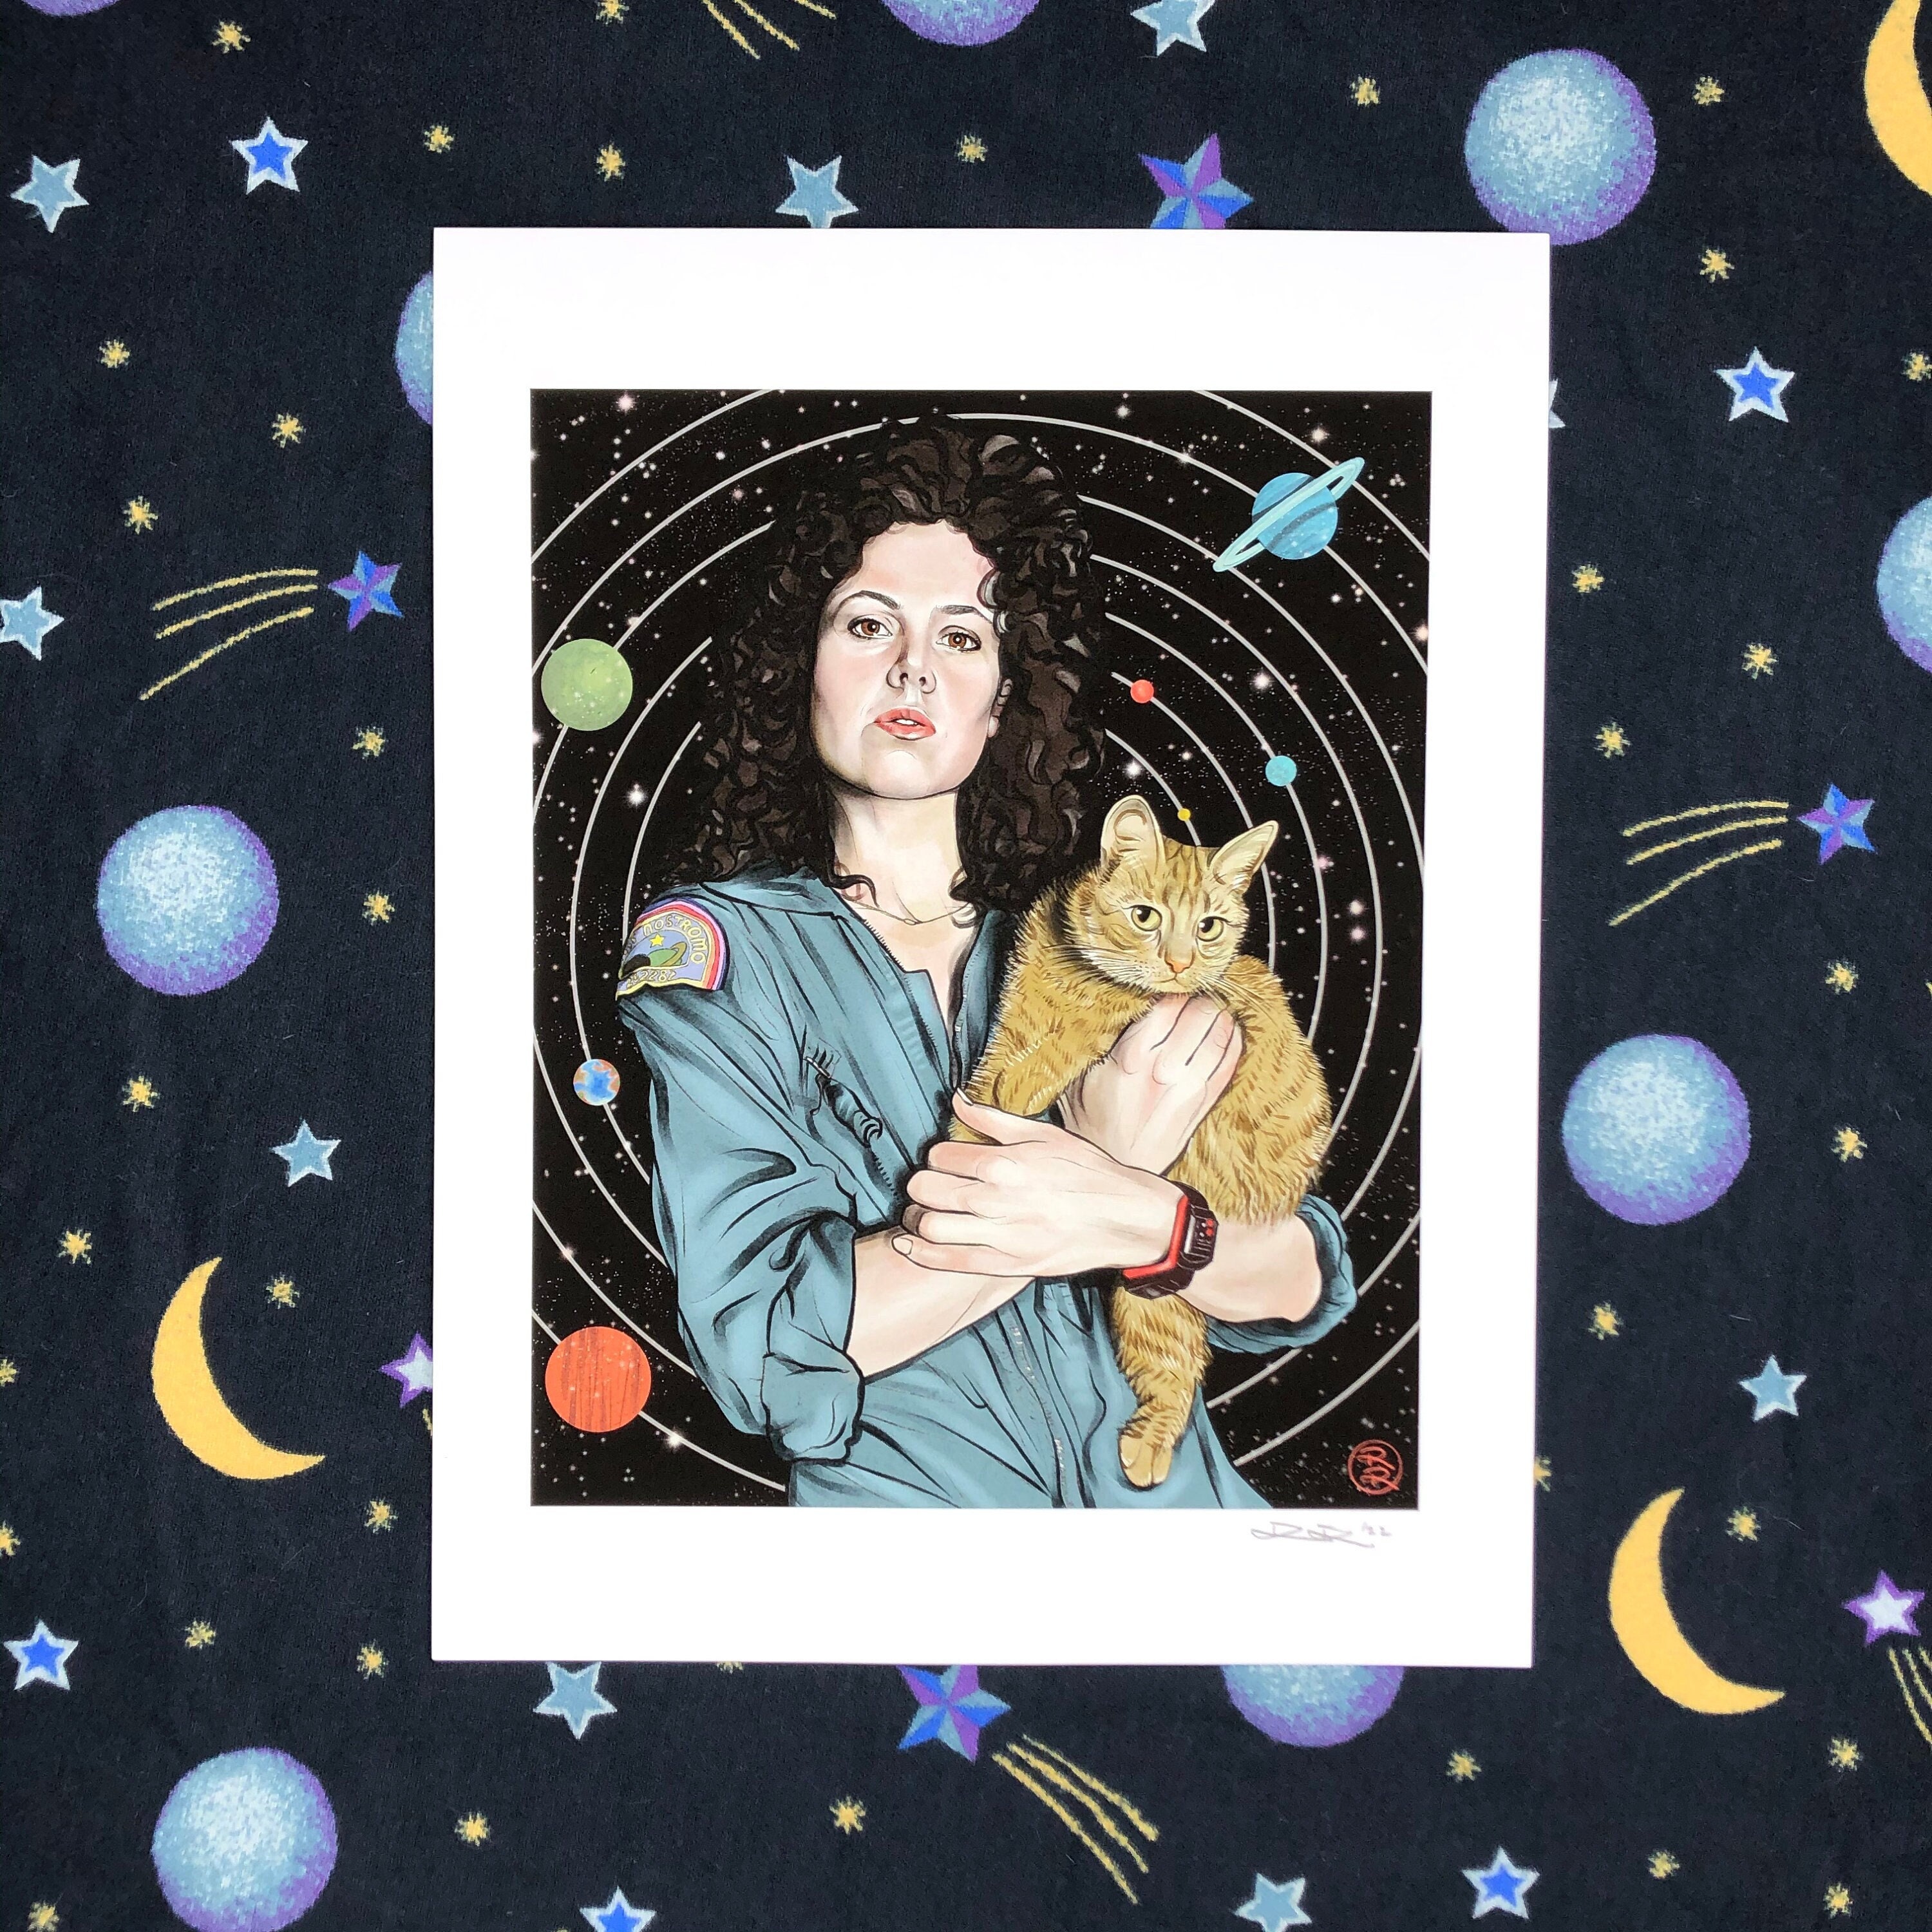 Ripley - CUADRO-LIENZO-PAINT BY NUMBER GATOS FELICES